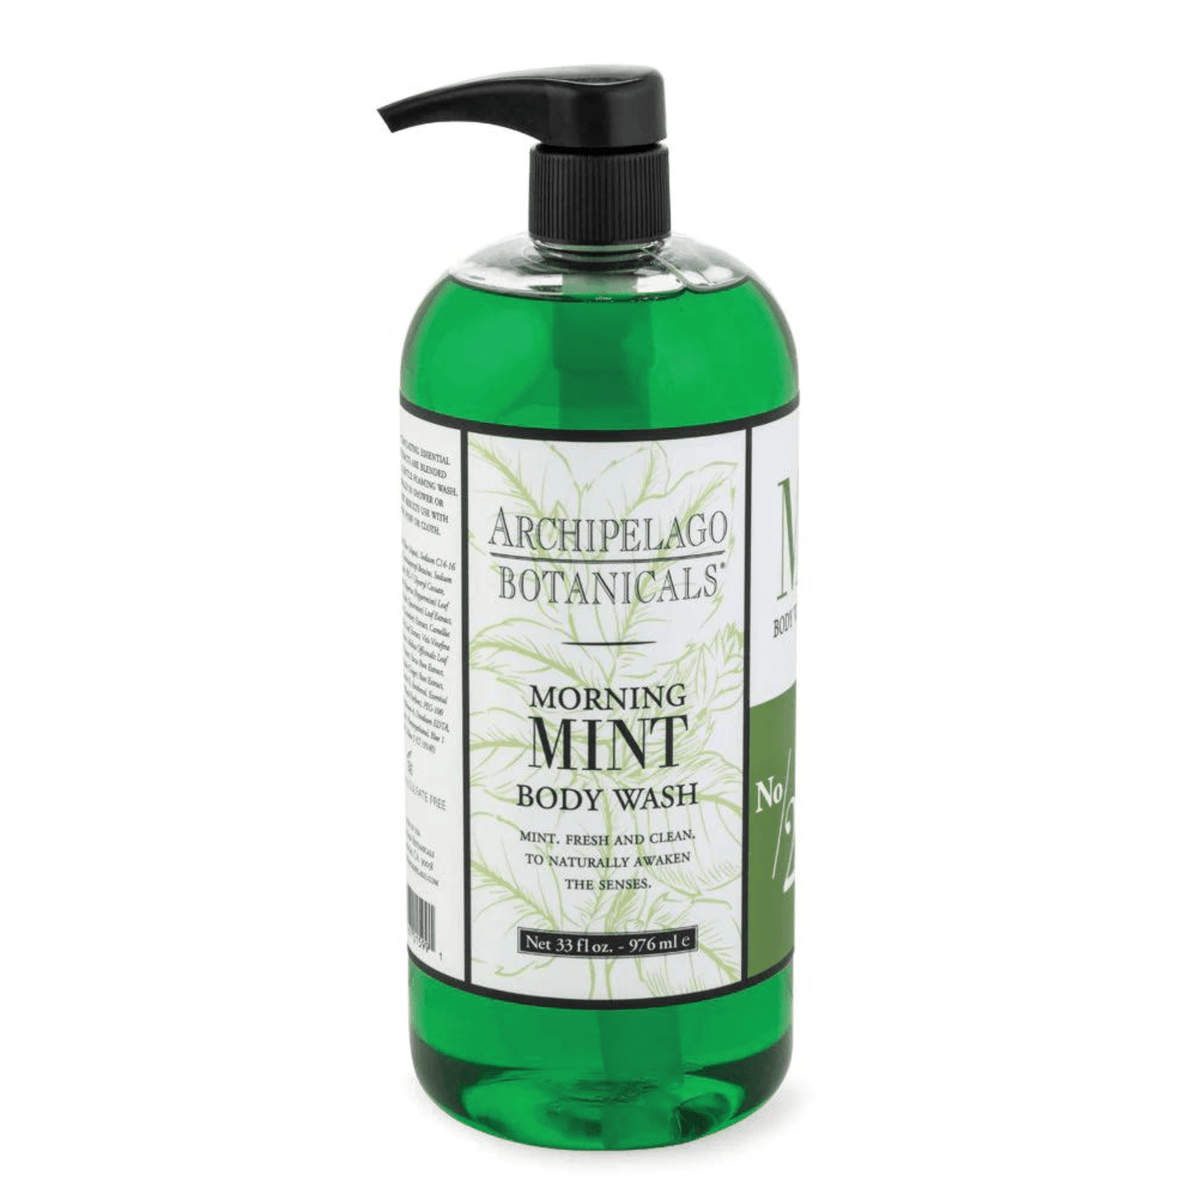 Primary Image of Morning Mint Body Wash